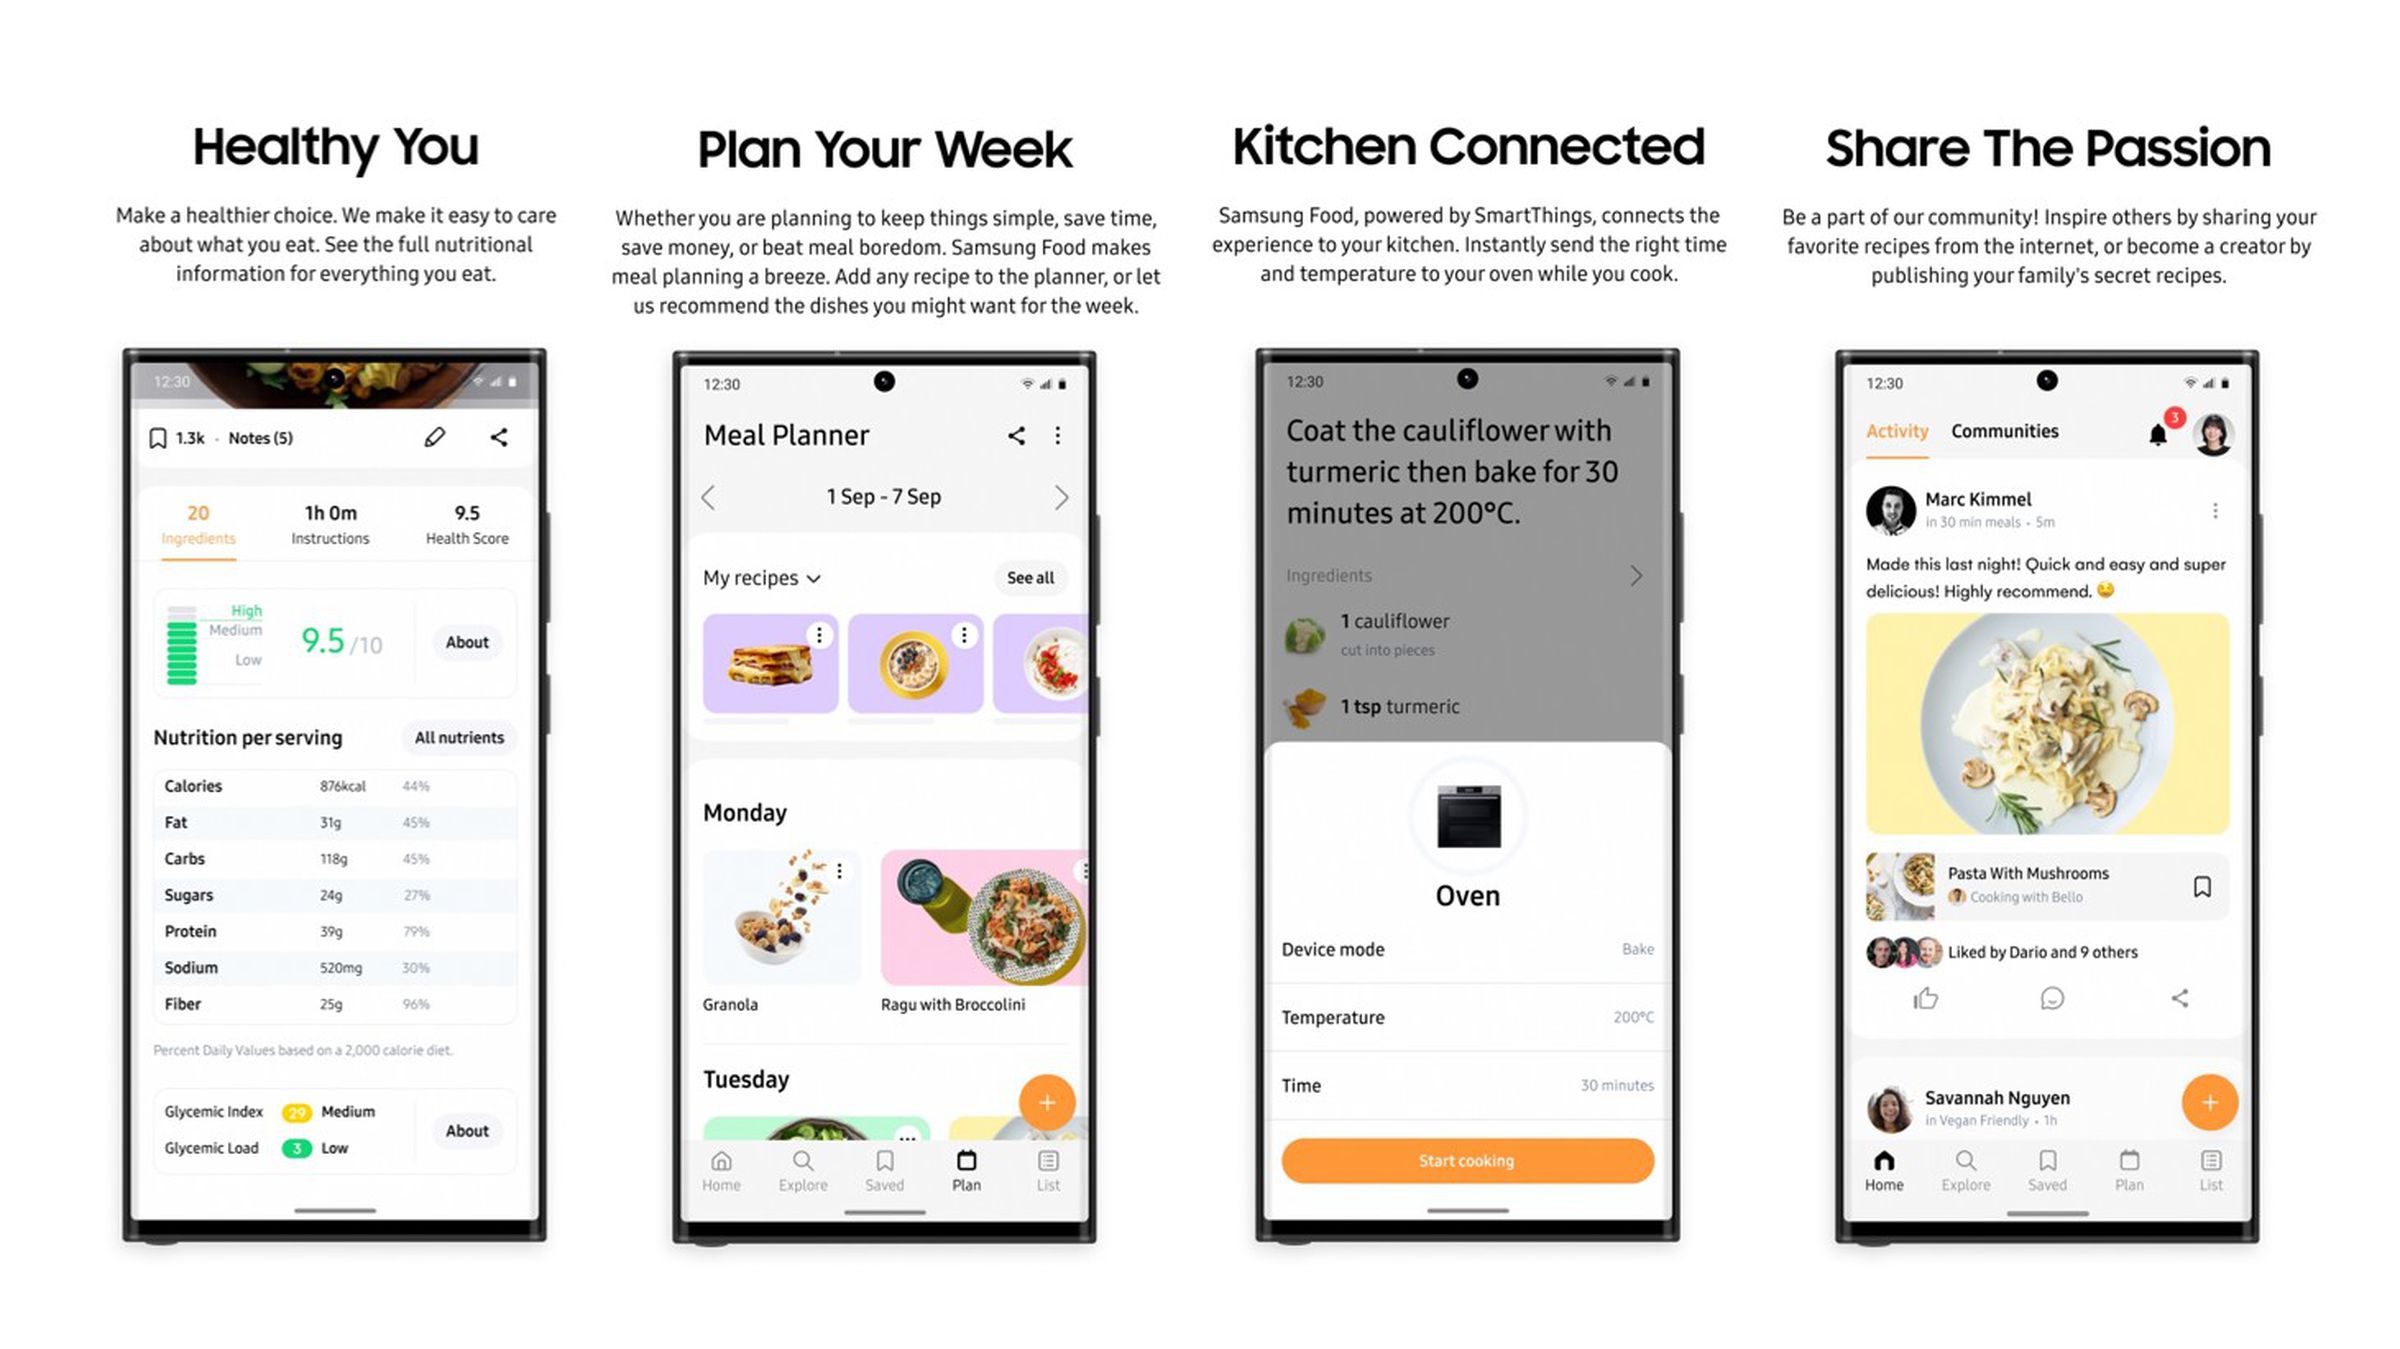 Samsung Food is a central place to manage recipes, meal plans, and shopping lists. It also integrates with the SmartThings smart home platform.